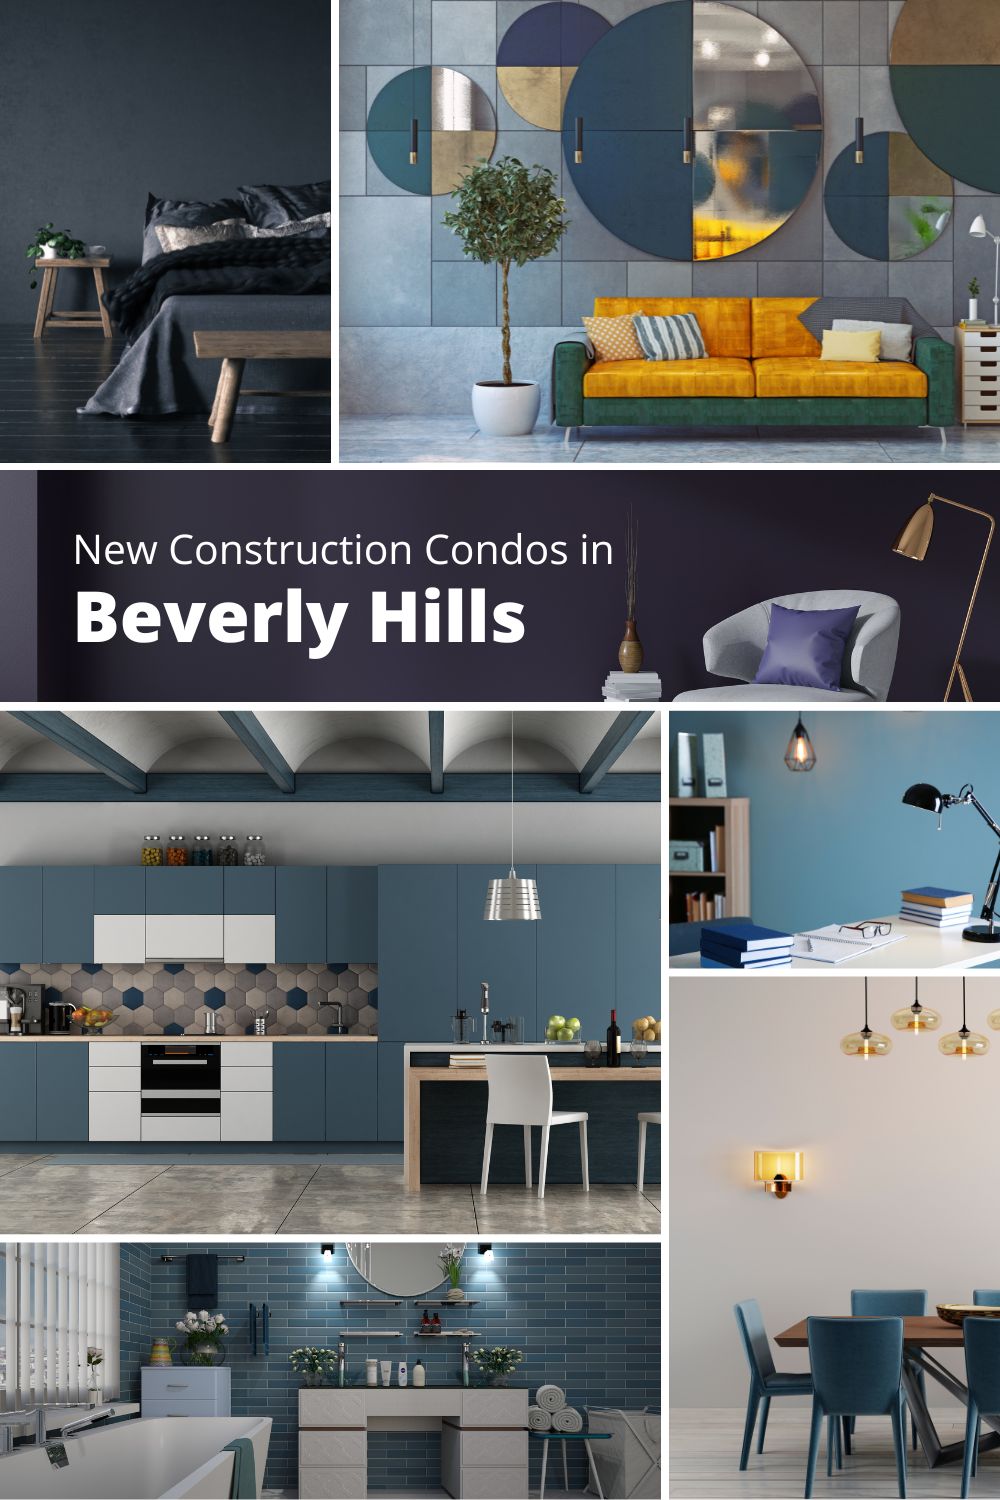 New Construction Condos in Beverly Hills